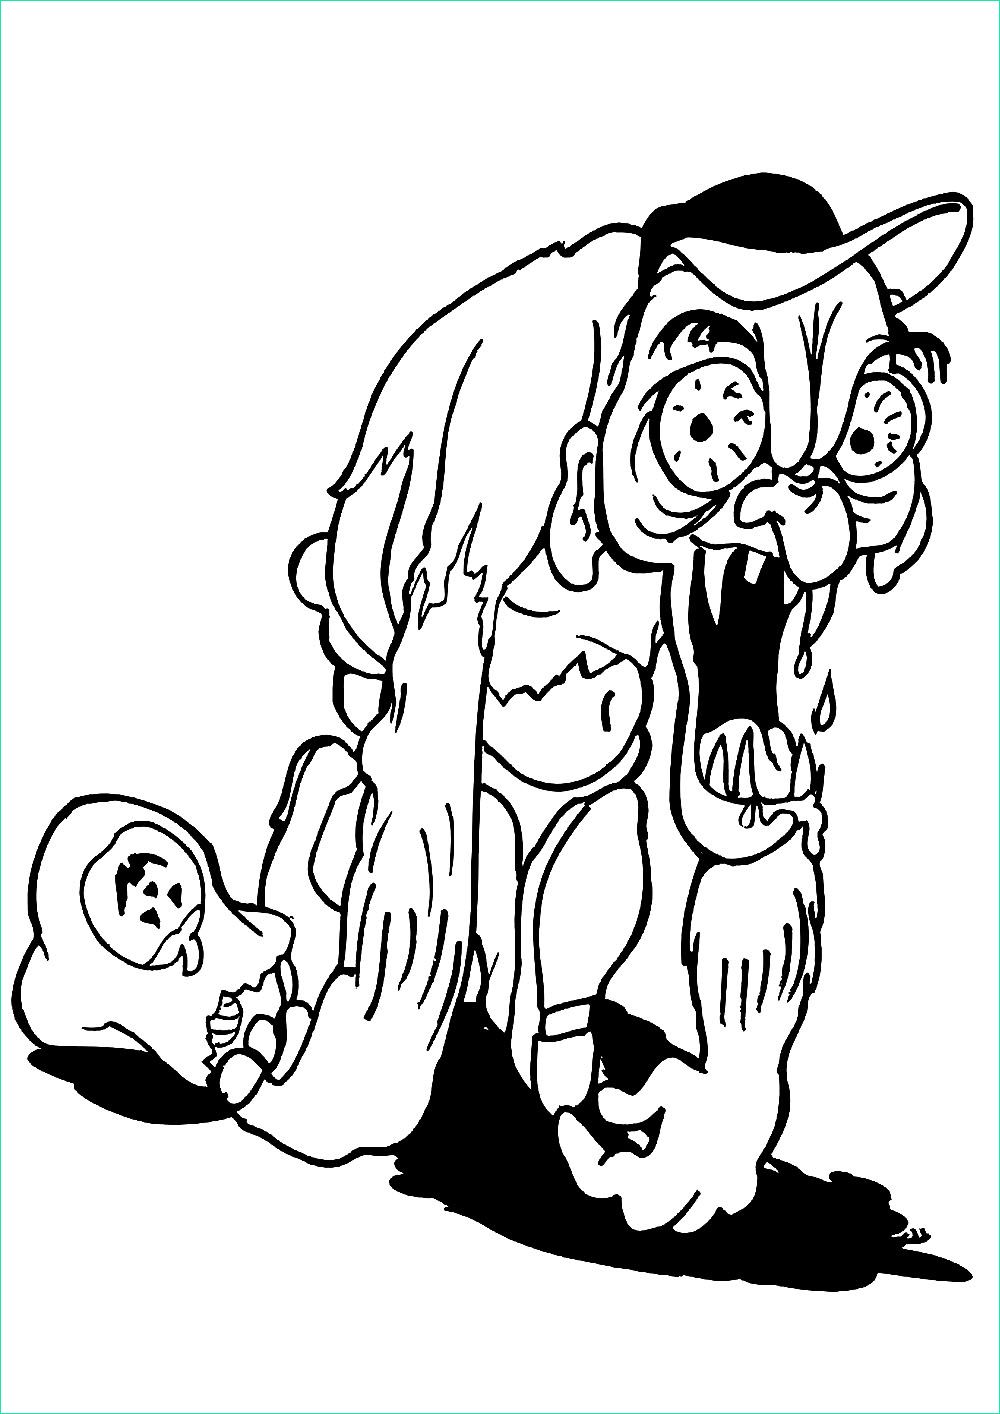 image=coloriages halloween coloriage zombie halloween 1